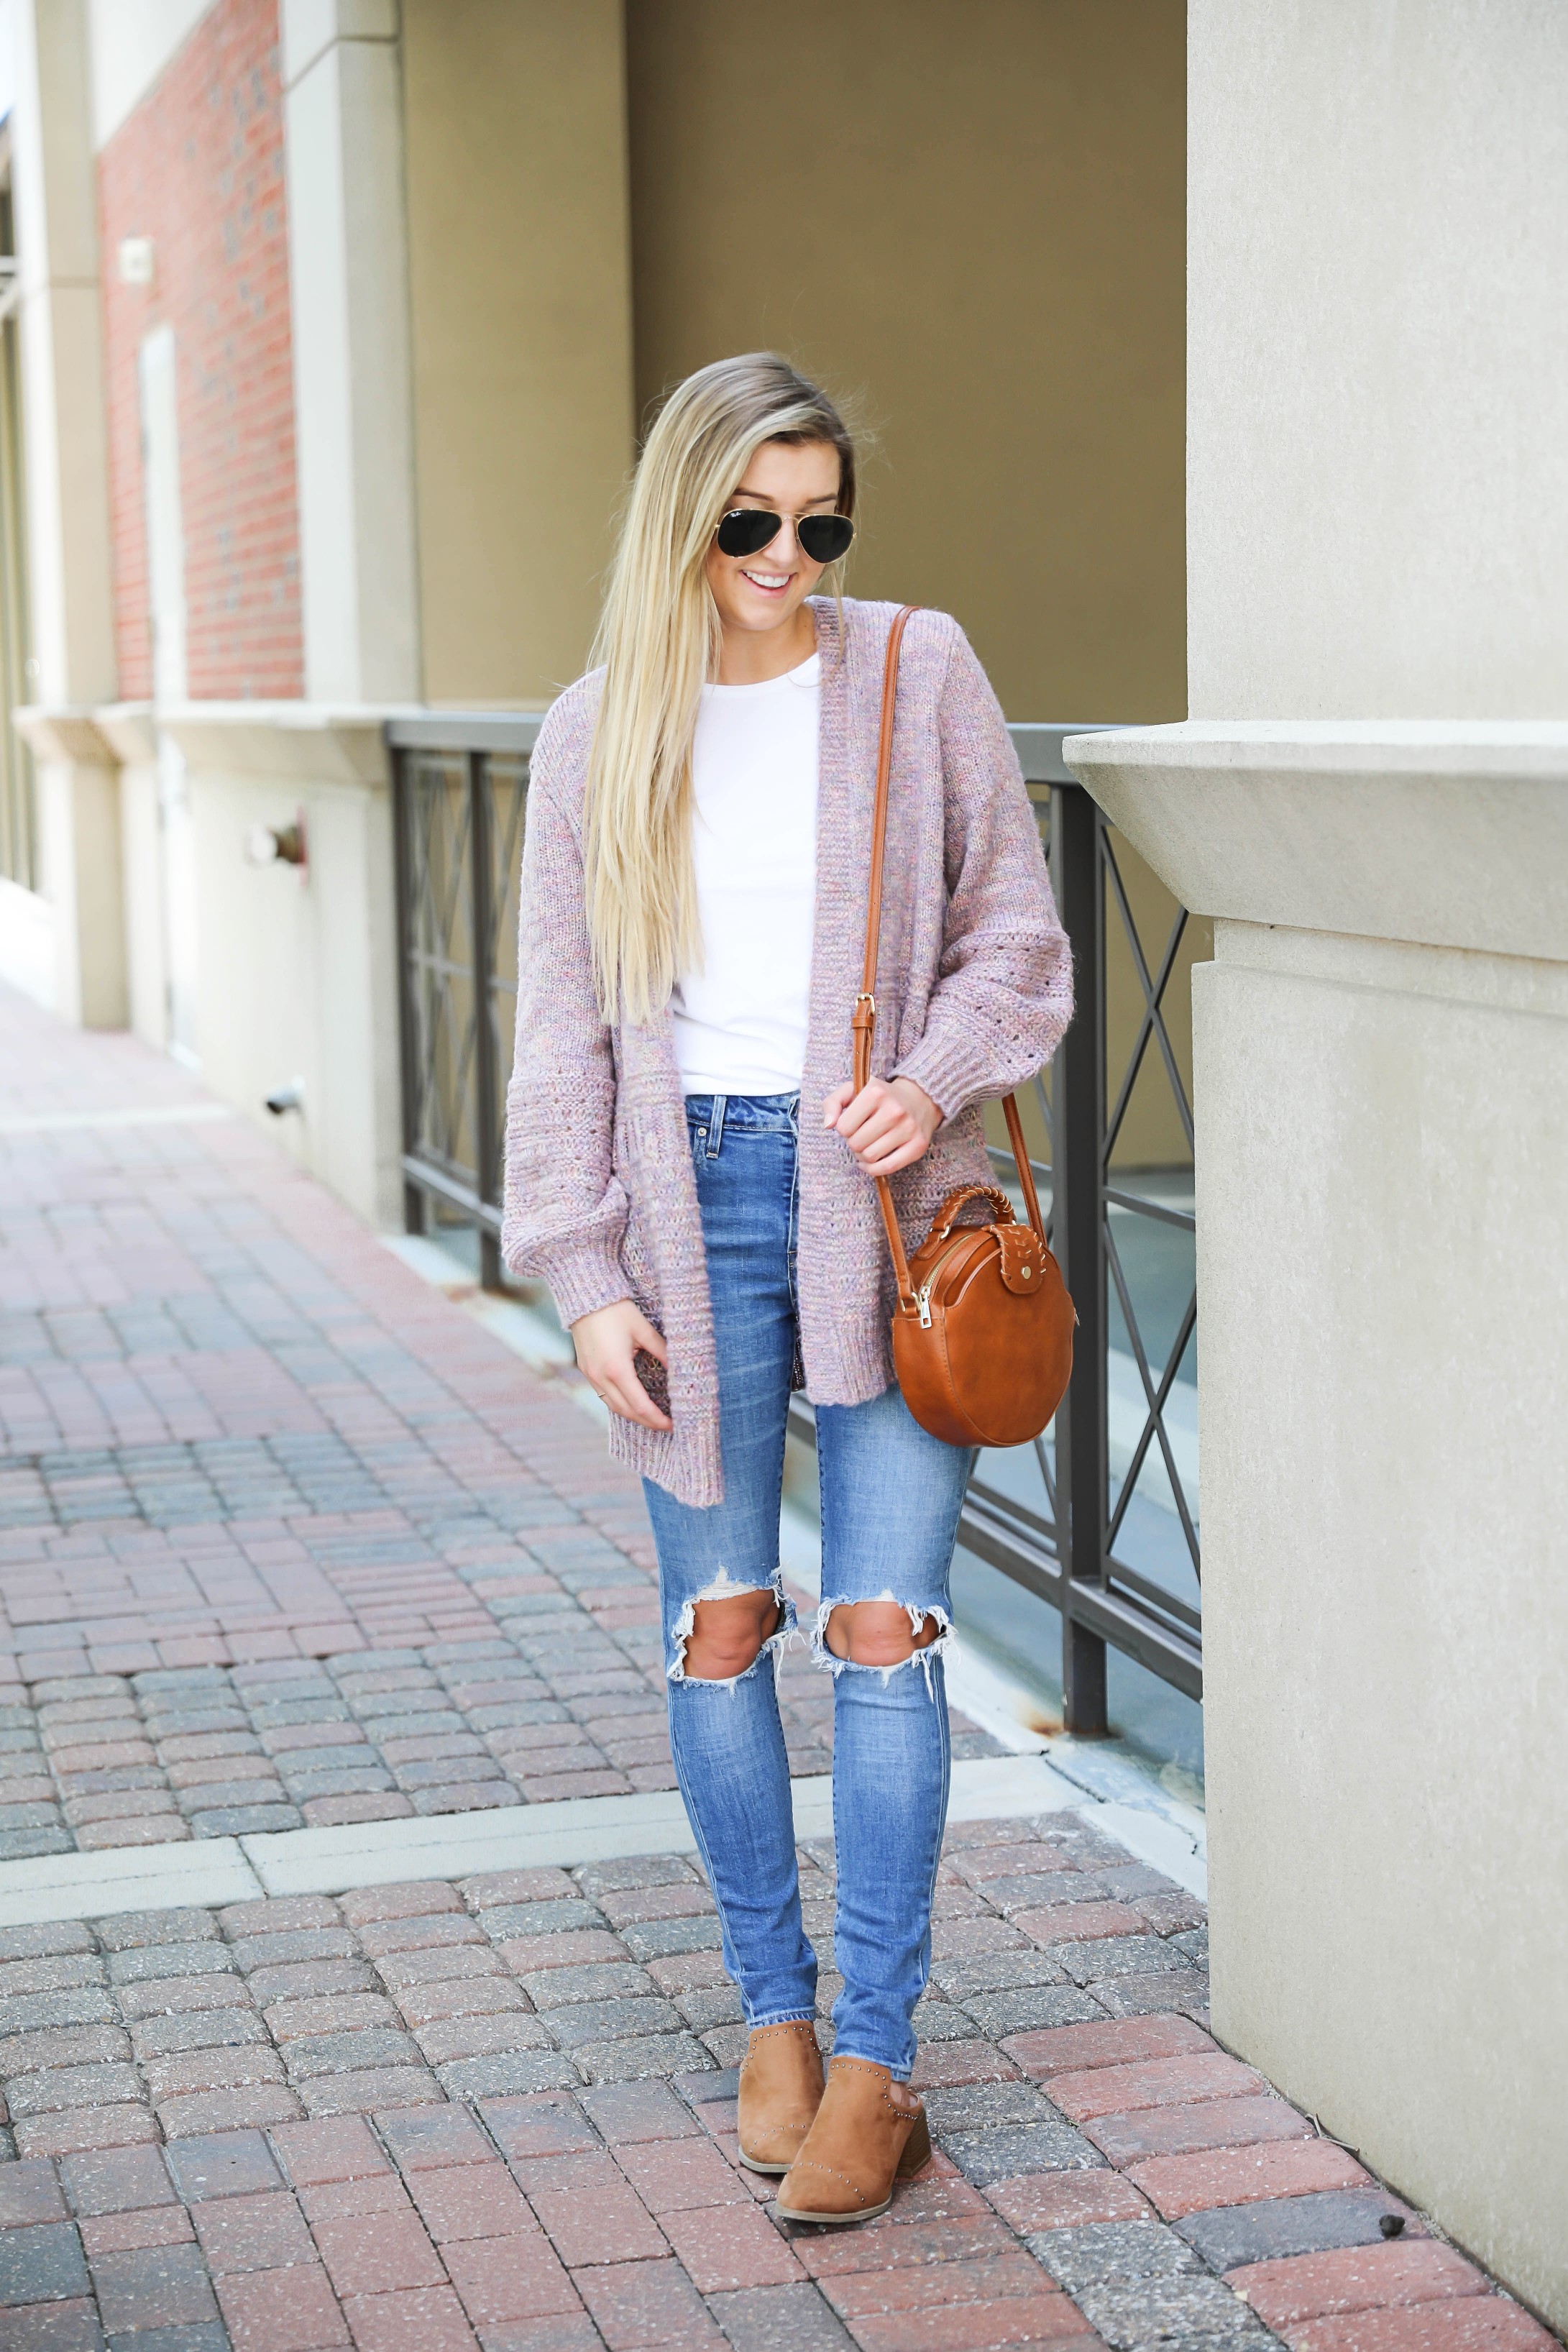 Pink knit cardigan with ripped denim jeans! I paired this look with the cutest pointed toe bootie slides from target! I love Target style, their shoes are so cute! Details on this fall outfit on fashion blog daily dose of charm by lauren lindmark